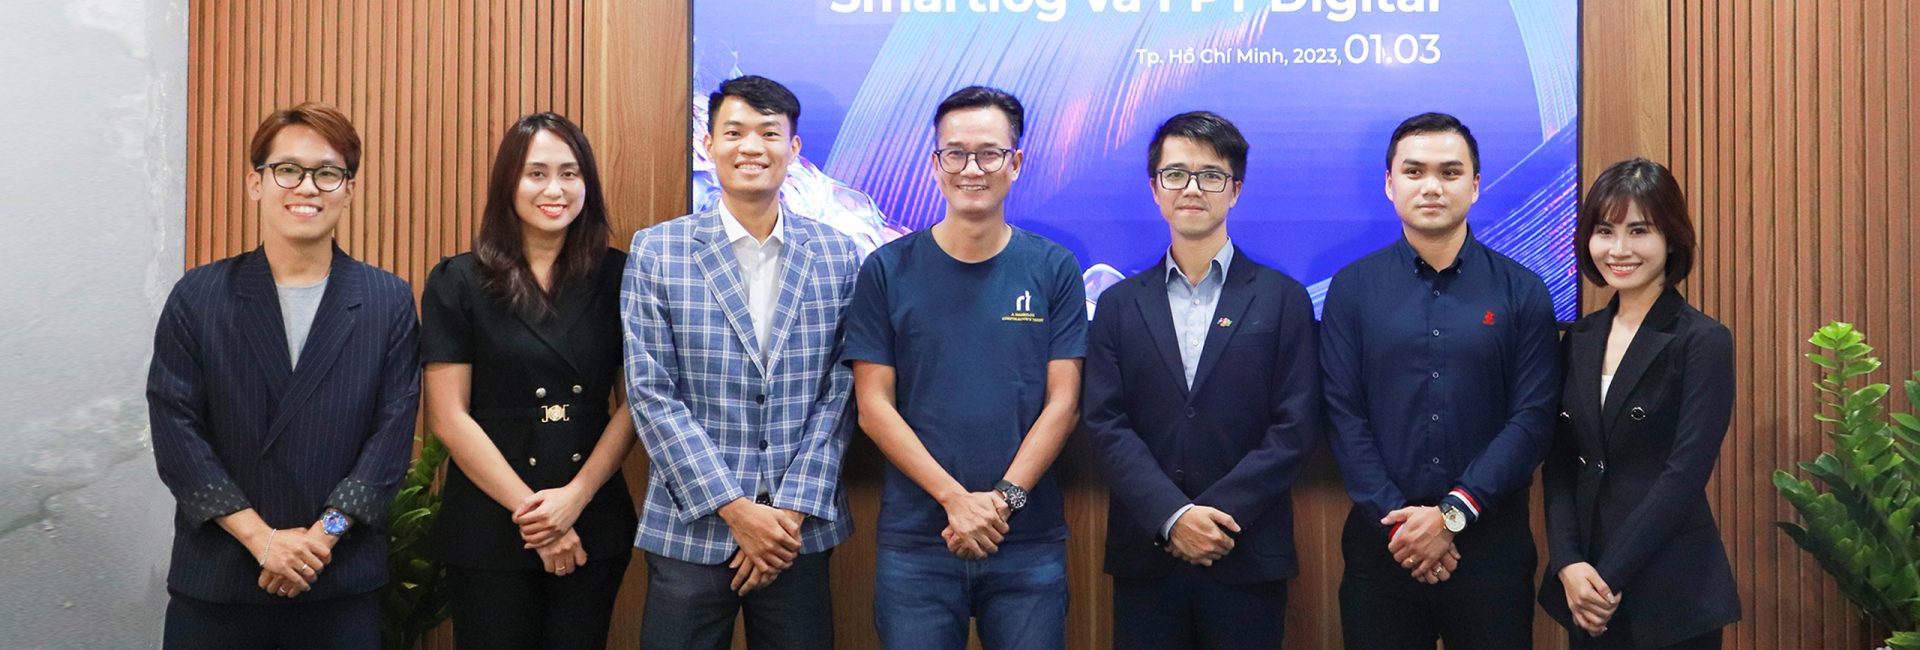 FPT Digital and Smartlog Vietnam have formed an official partnership to assist businesses in their digital transformation for logistics operations